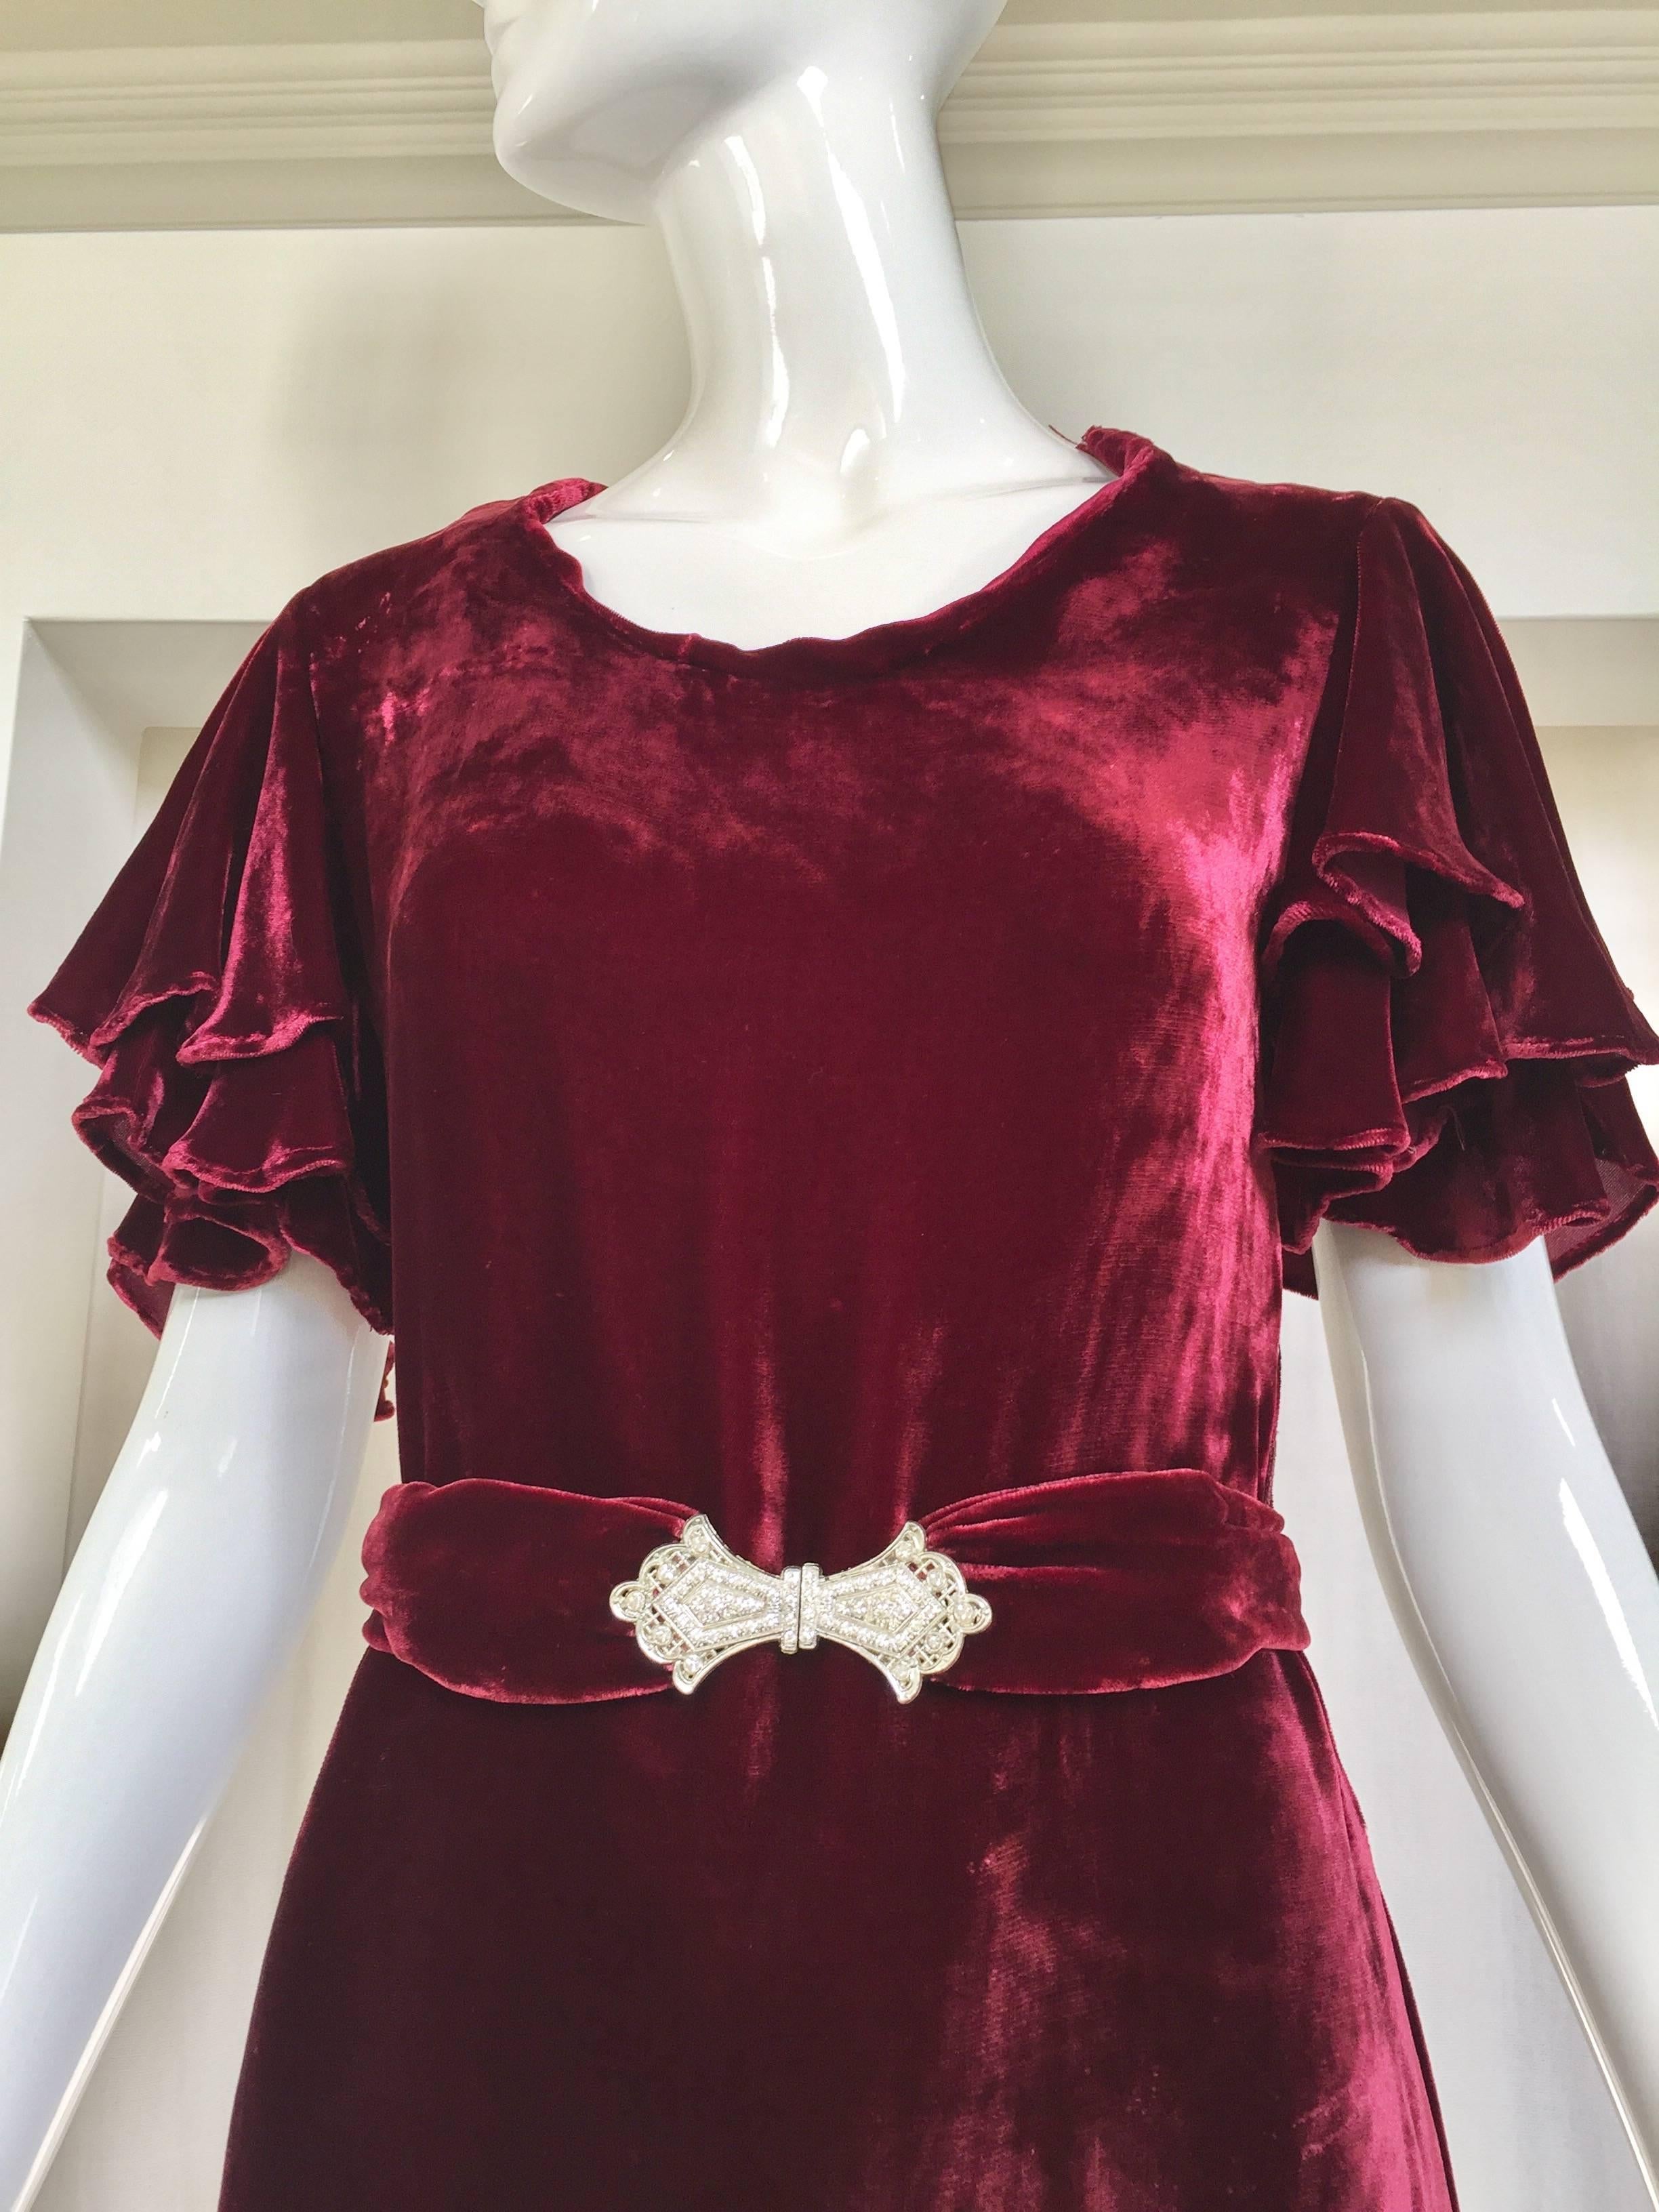 Elegant 1930s maroon rayon velvet bias cut dress with art deco rhinestones belt. (small marks on left upper) see image#2 A few marks to the nape of the velvet on the right side near the upper breast/shoulder area on the right side. 
( small pin